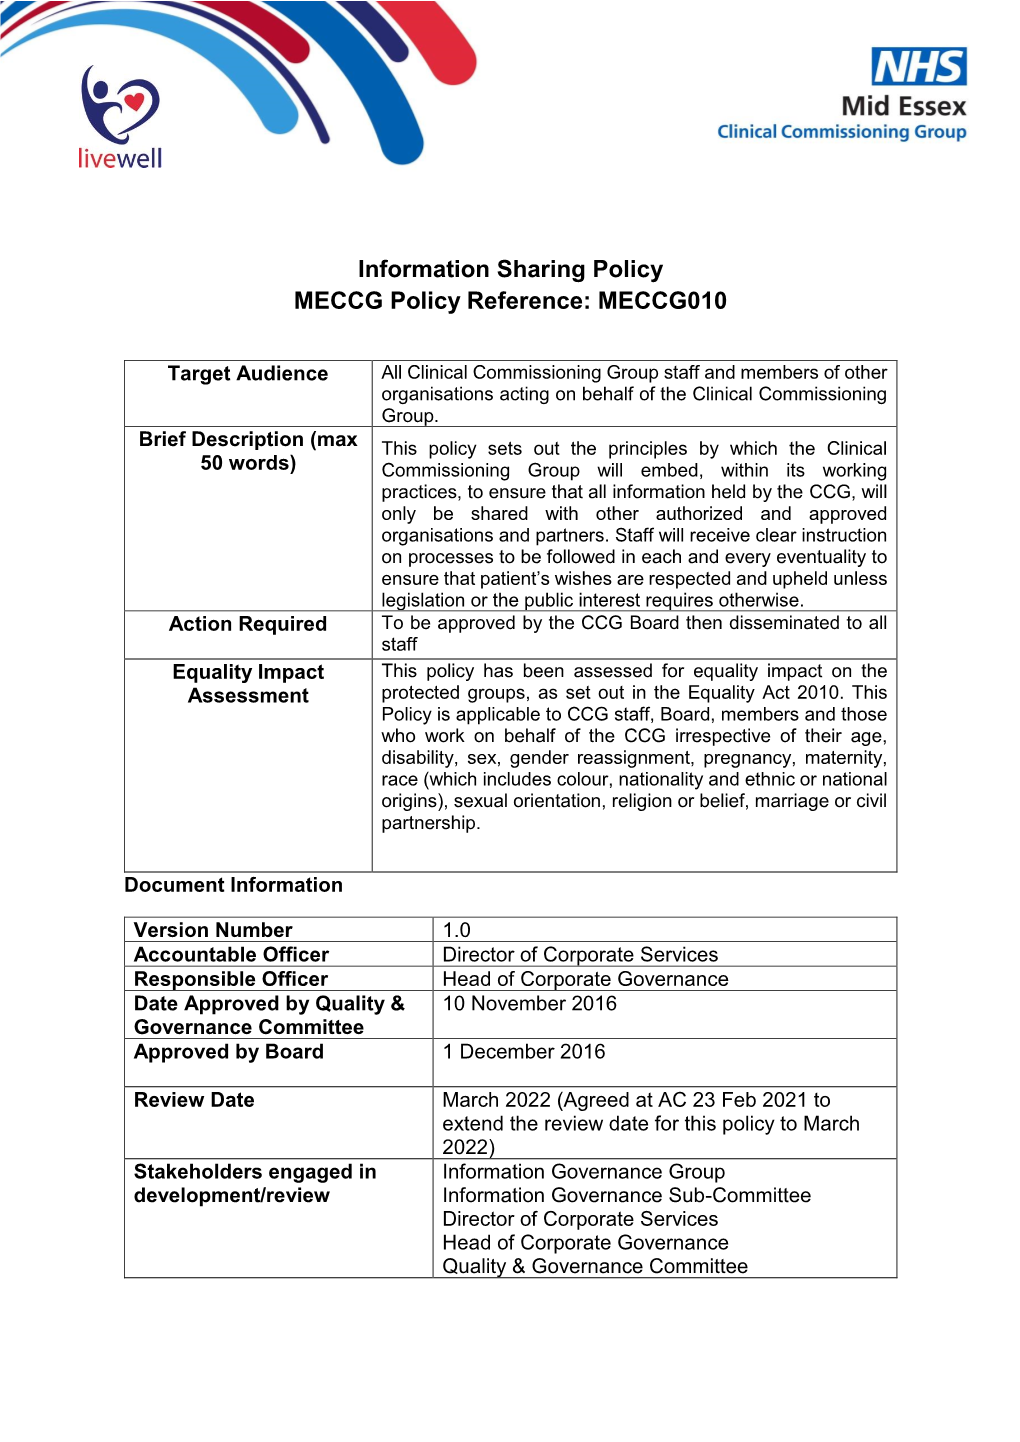 Information Sharing Policy MECCG Policy Reference: MECCG010